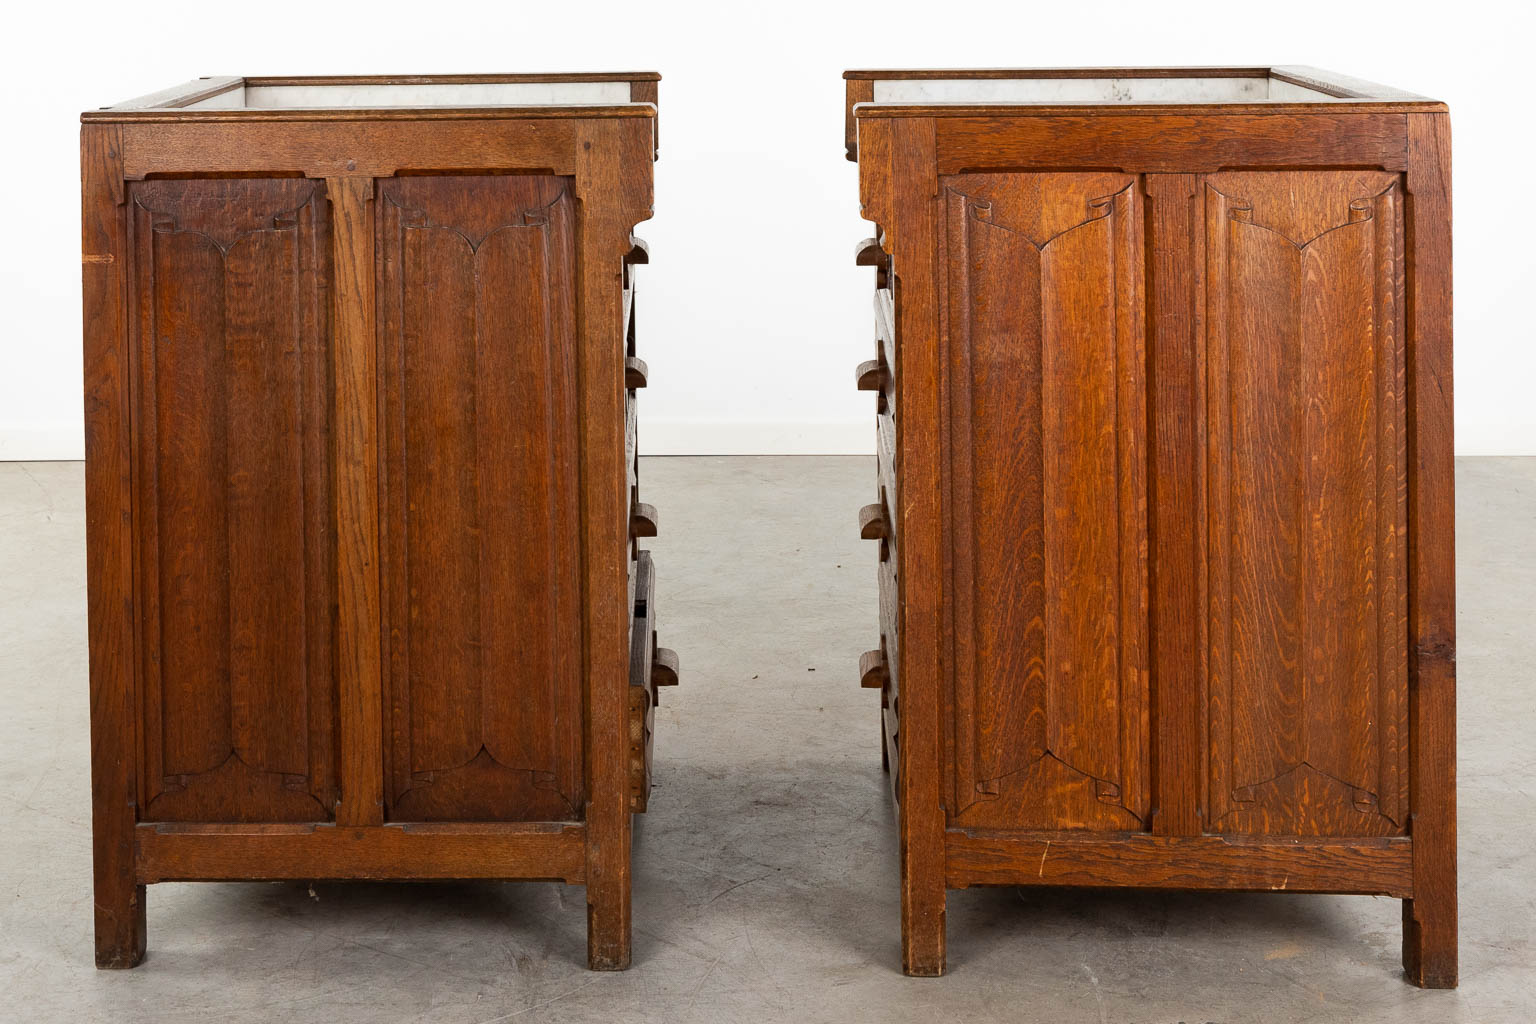 A pair of wood-sculptured cabinets in a gothic revival style. 19th C. (D:59 x W:70 x H:89 cm)